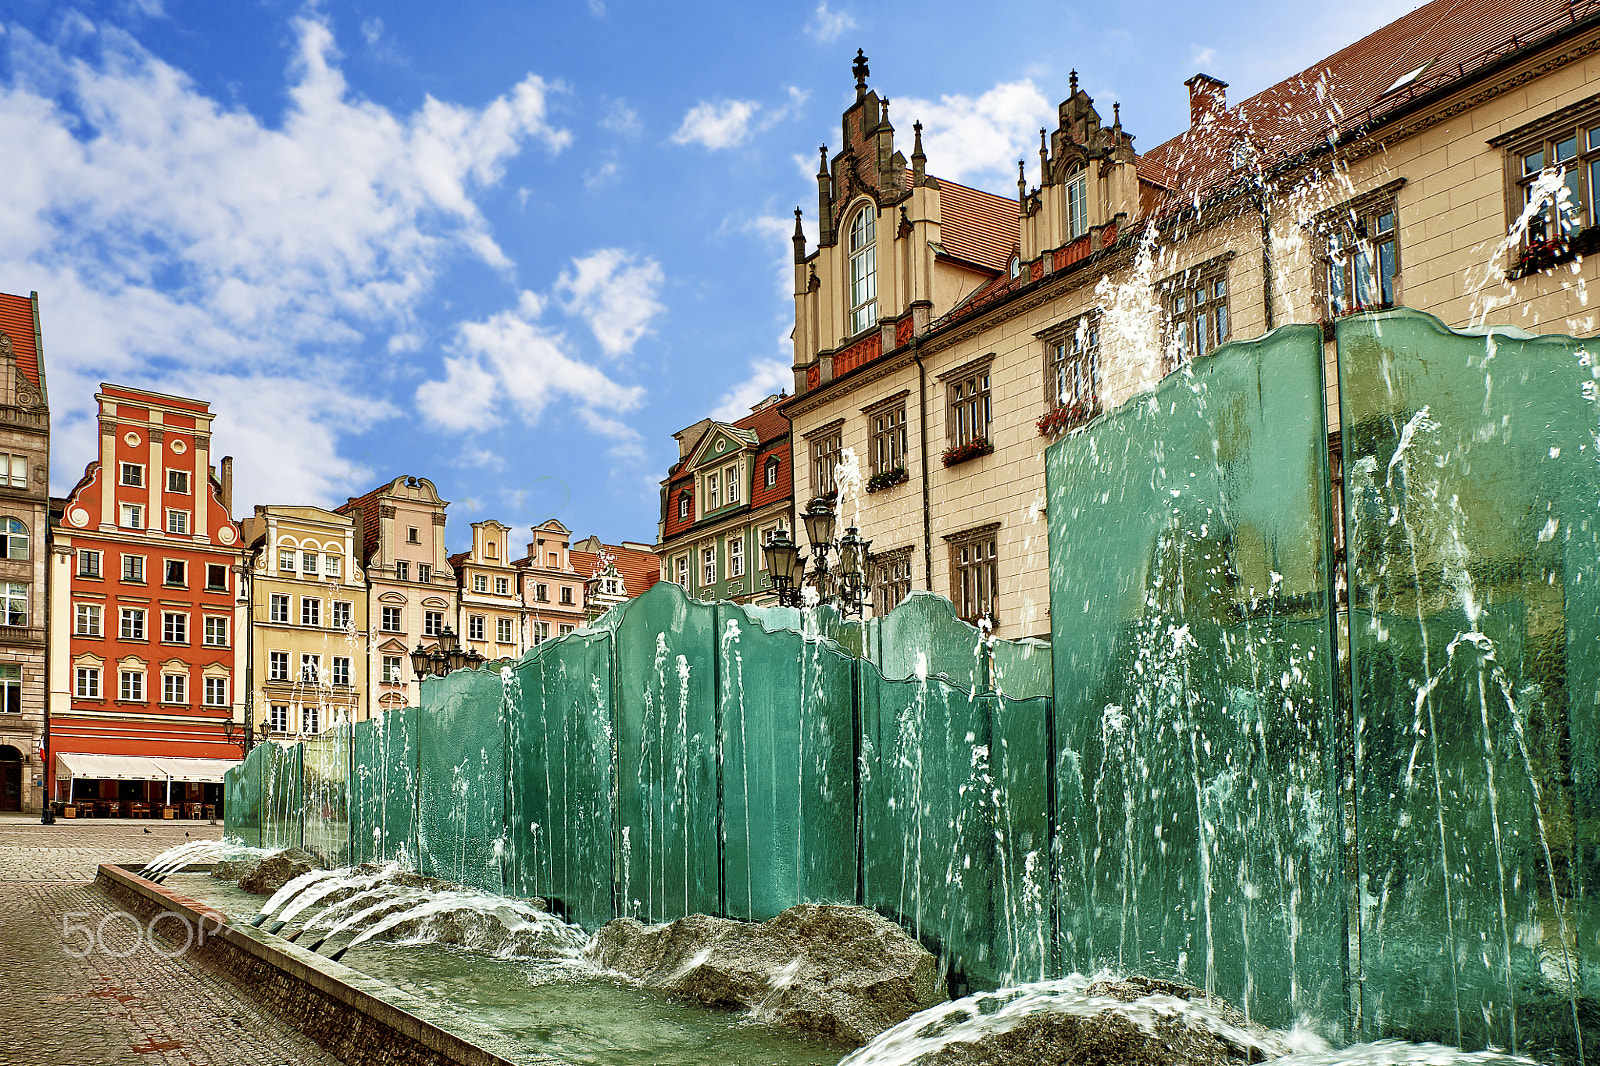 Fujifilm X-T10 sample photo. Central market square in wroclaw poland with old colorful houses and famouse fountain on a bright... photography